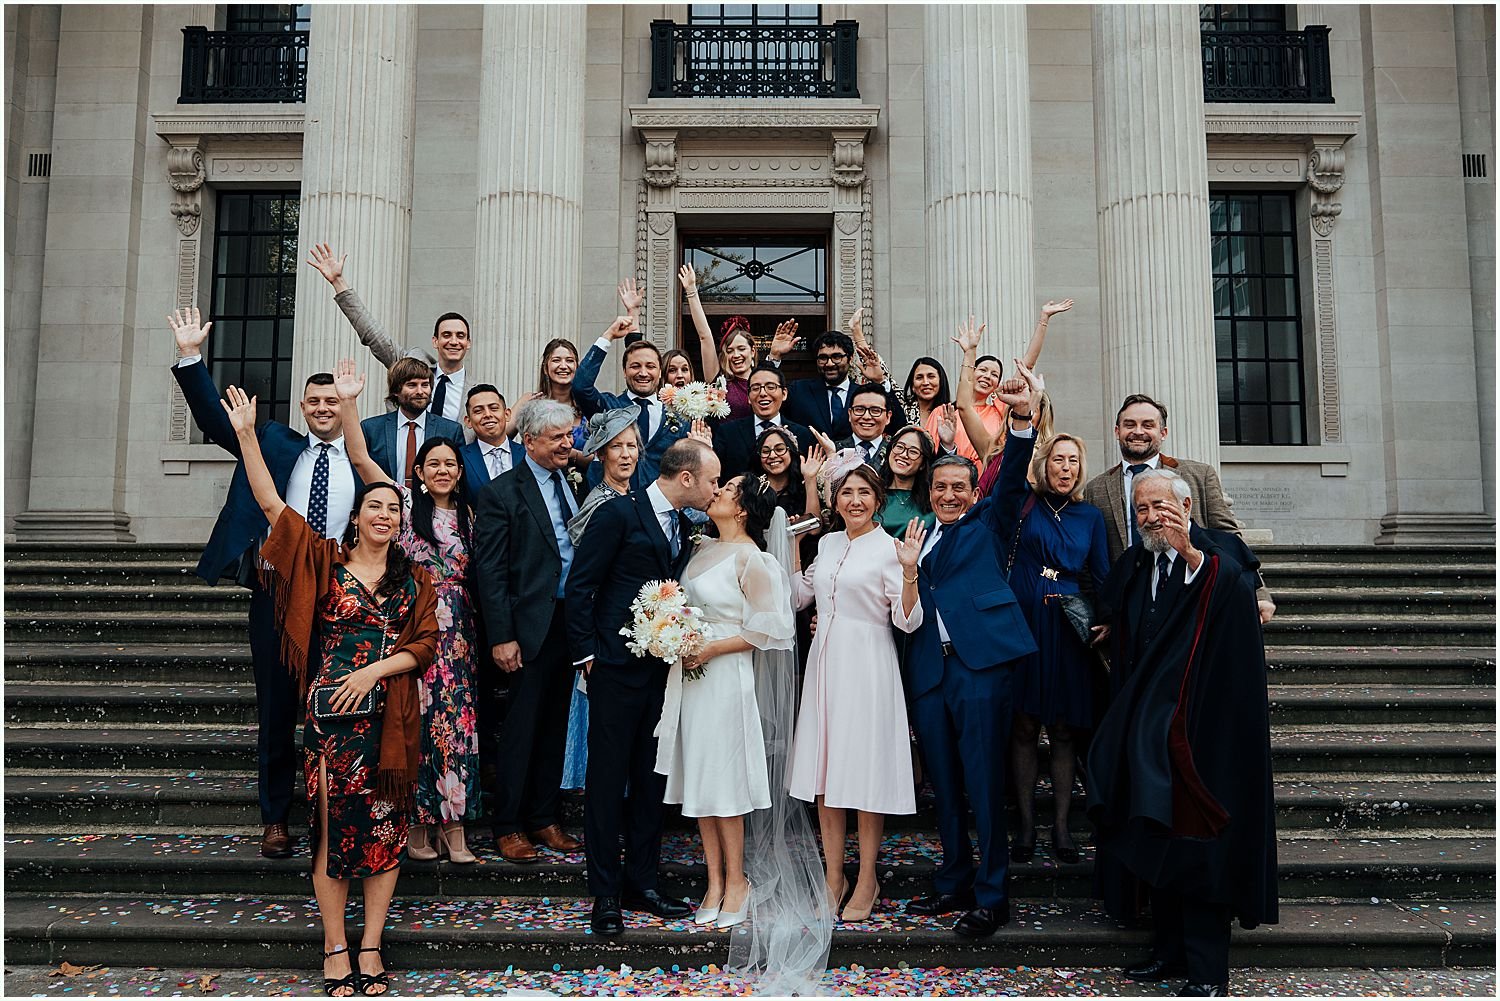 Group photo of all guests on steps at the Old Marylebone Town Hall